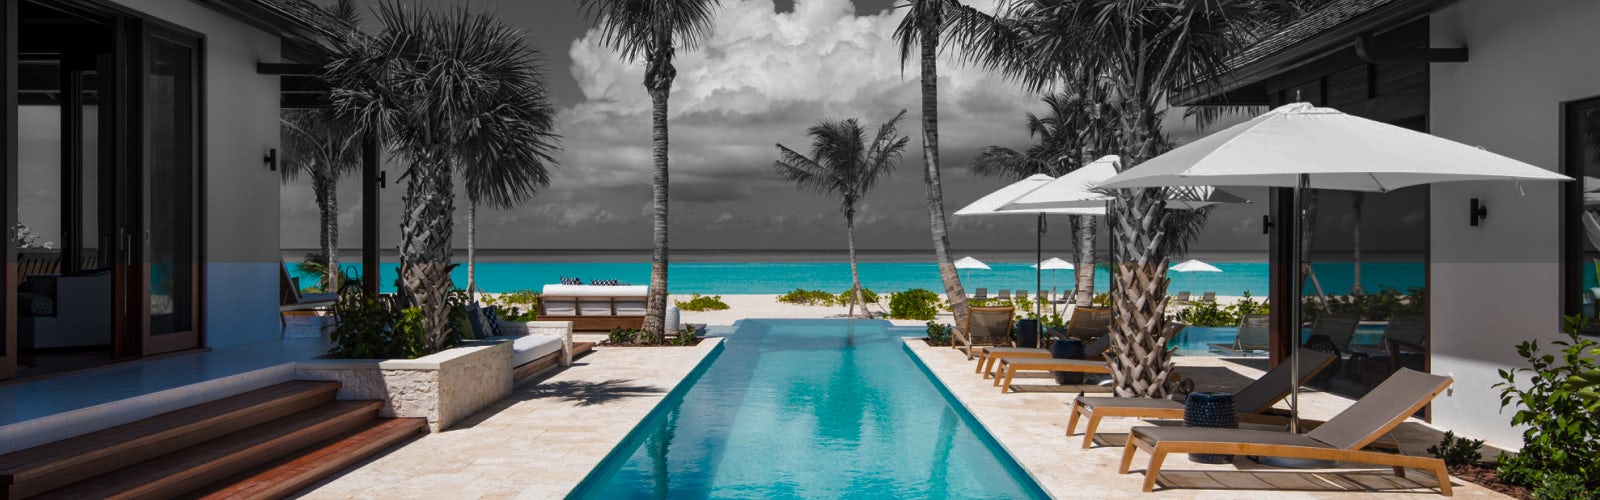 A desaturated image of a luxury villa with pops of blue color on the swimming pool and ocean behind